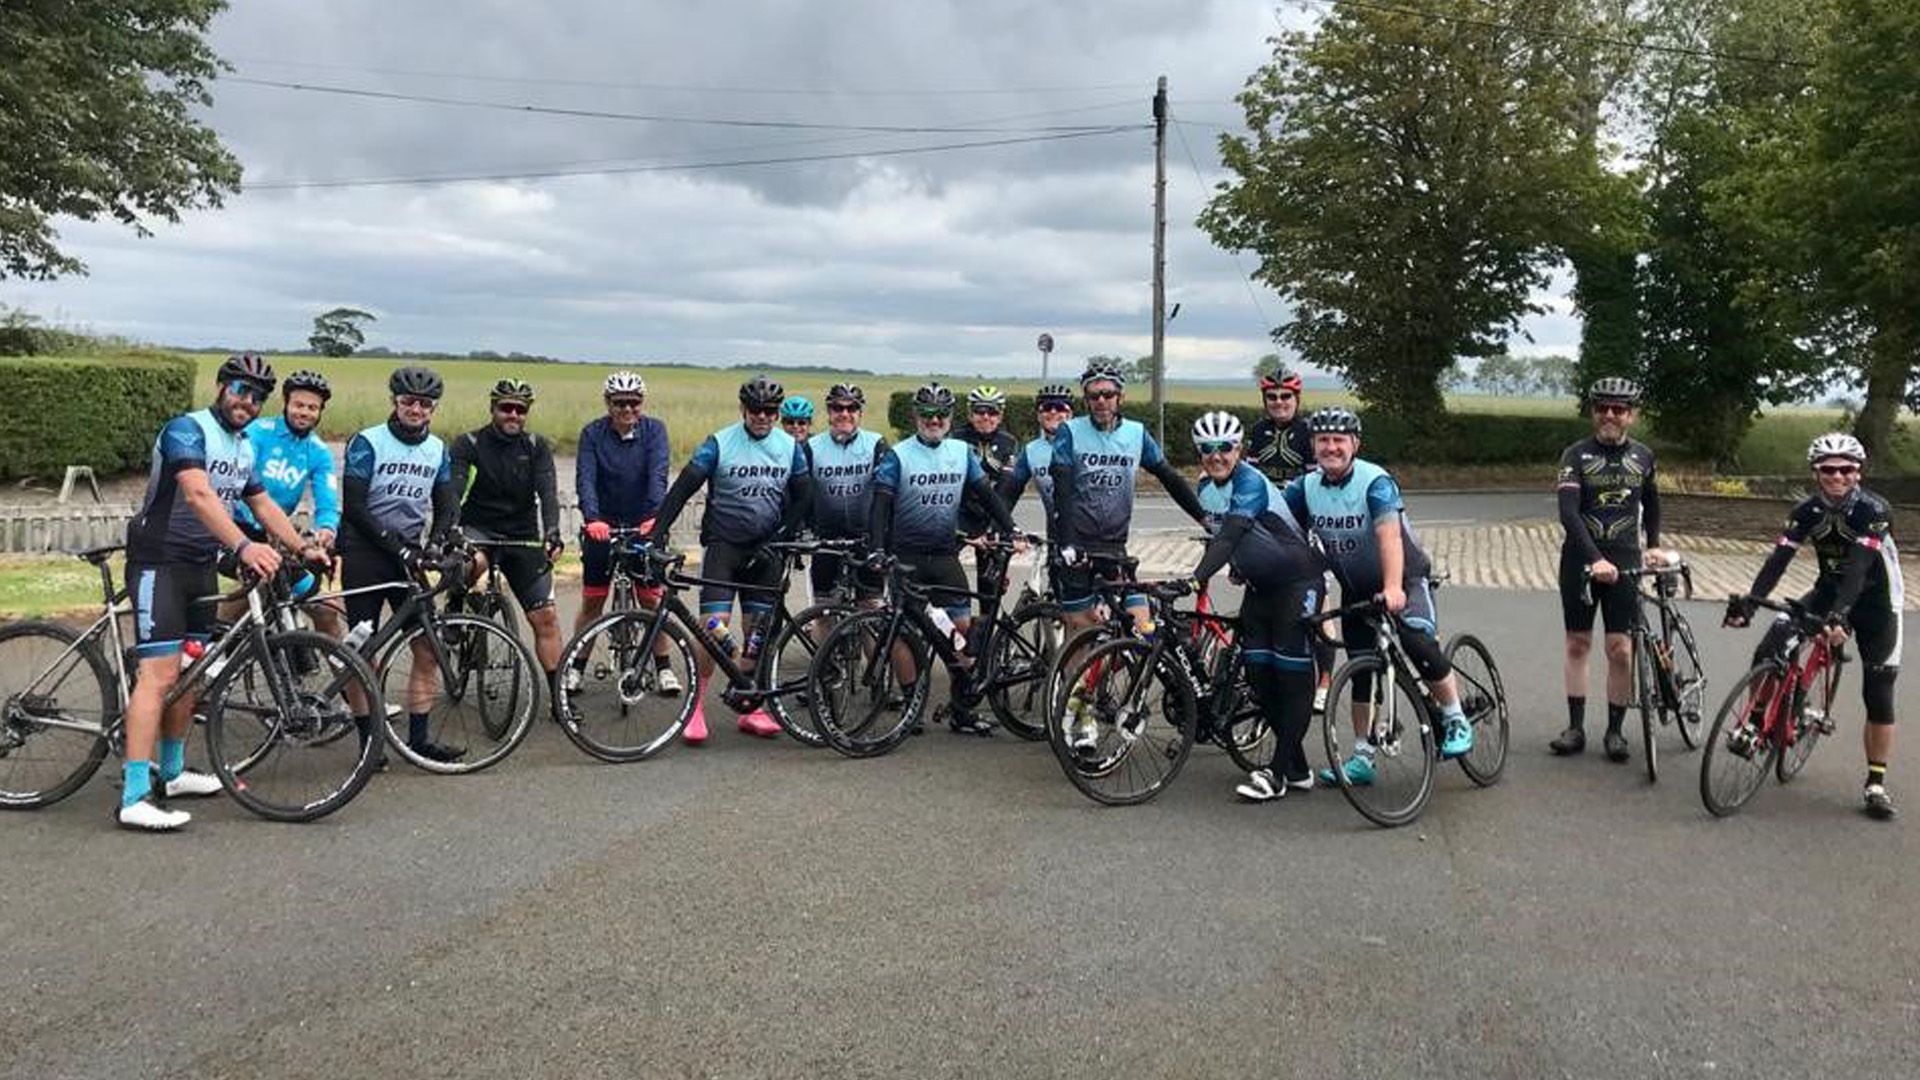 A Cycling Team’s Tribute To A Police Inspector And Friend